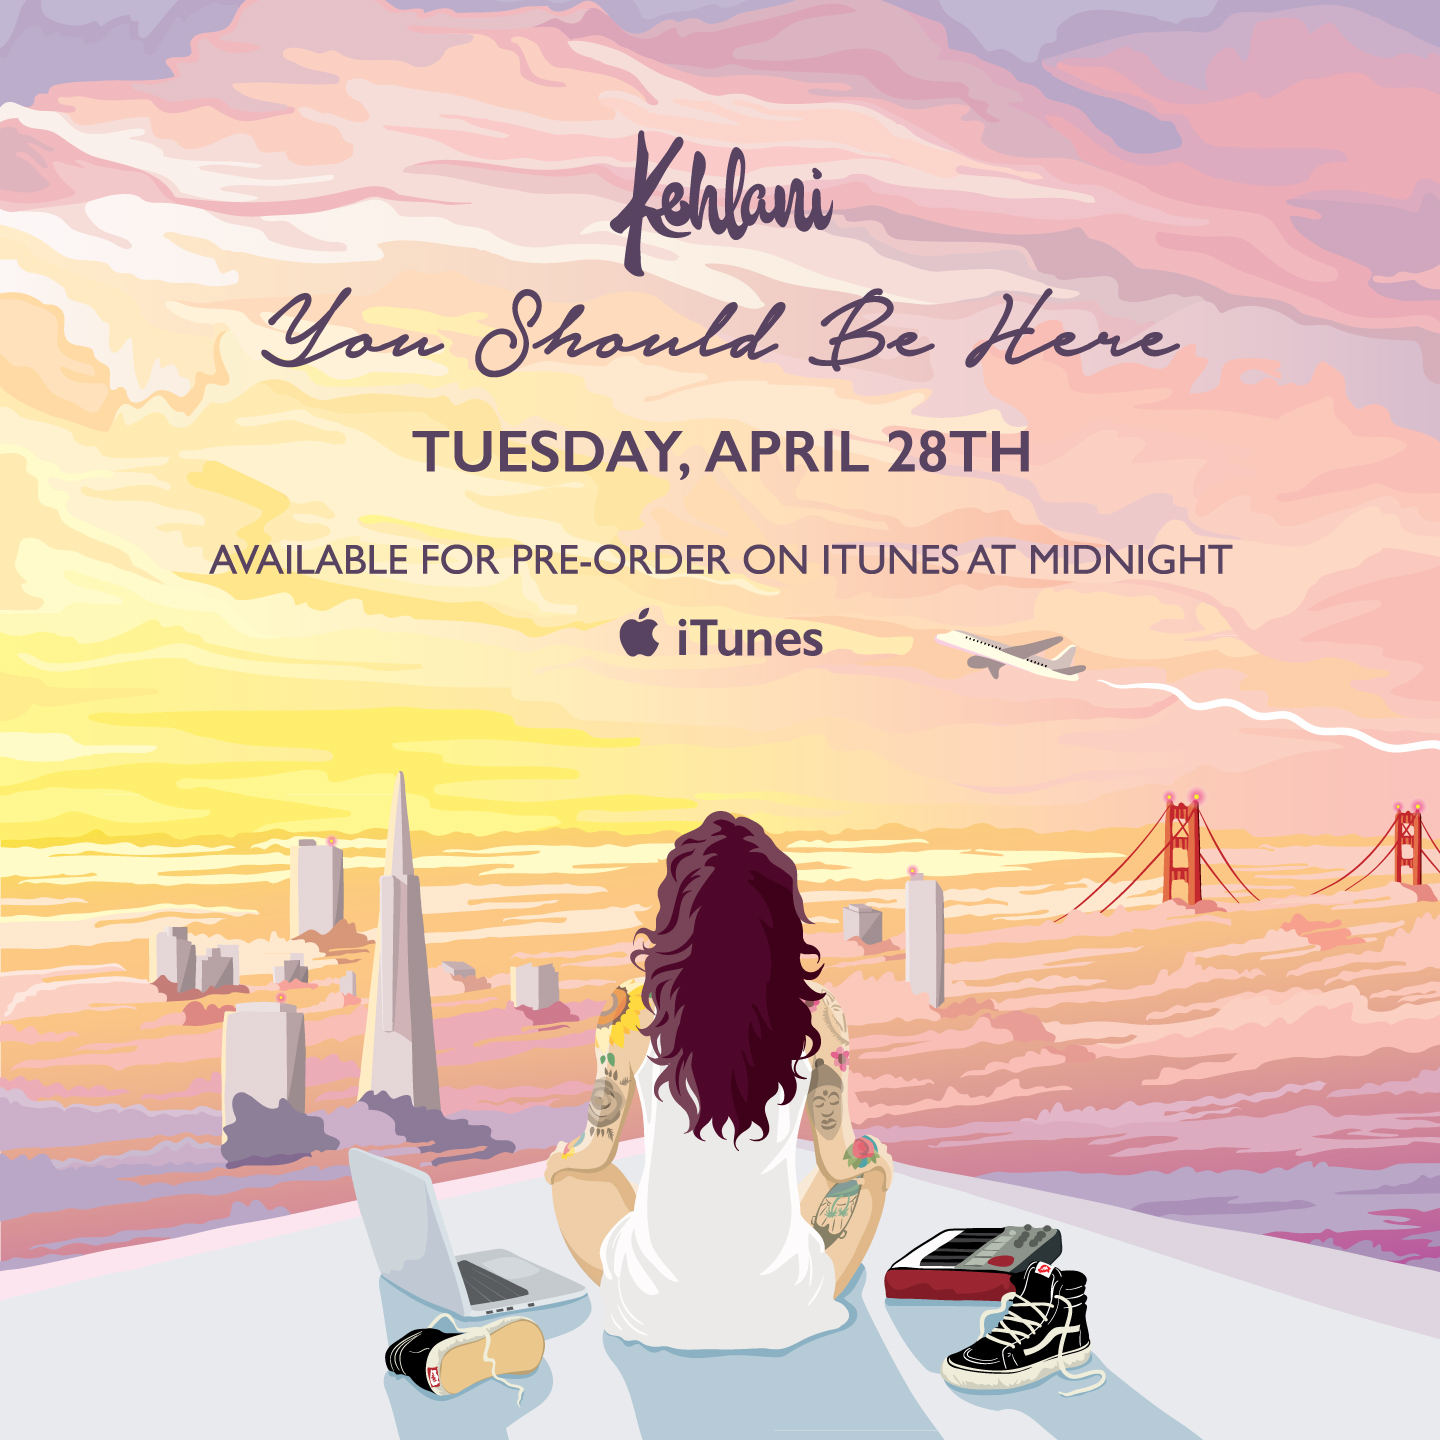 Kehlani Announces New Project "You Should Be Here", Set to Release 4/28